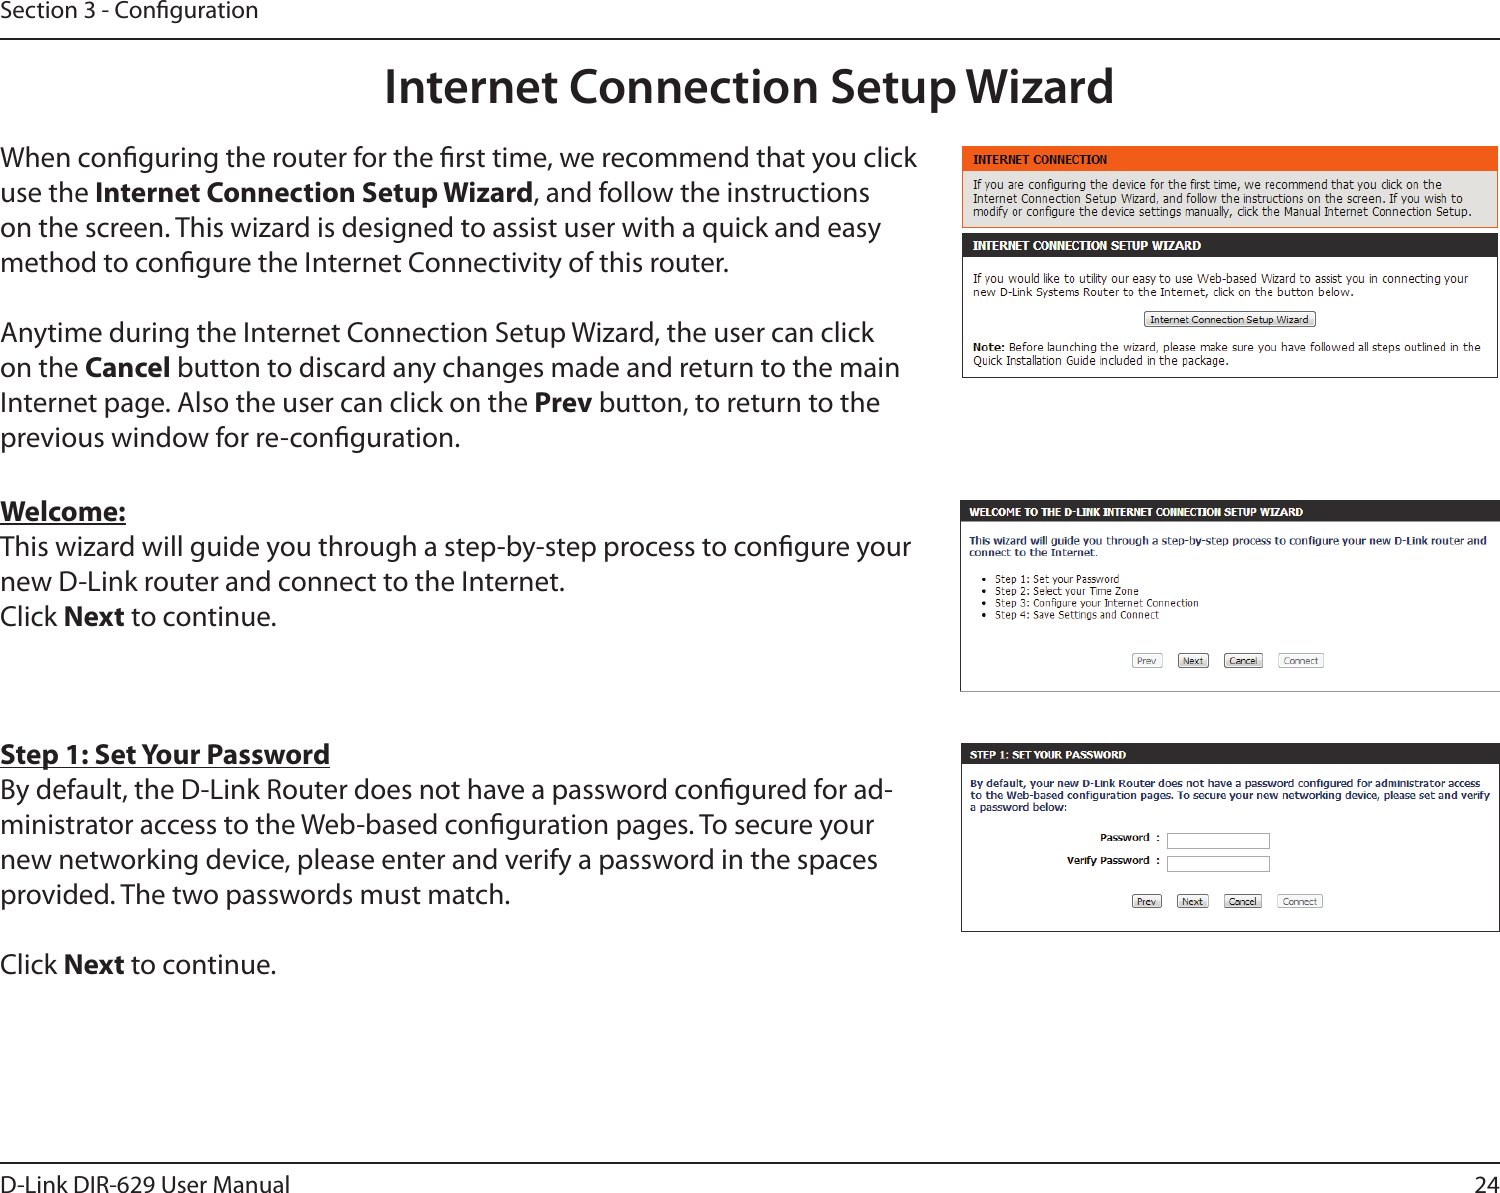 24D-Link DIR-629 User ManualSection 3 - CongurationInternet Connection Setup WizardWhen conguring the router for the rst time, we recommend that you click use the , and follow the instructions method to congure the Internet Connectivity of this router.Anytime during the Internet Connection Setup Wizard, the user can click on the Cancel button to discard any changes made and return to the main Internet page. Also the user can click on the Prev button, to return to the previous window for re-conguration.Welcome:This wizard will guide you through a step-by-step process to congure your new D-Link router and connect to the Internet. Click Next to continue.Step 1: Set Your Password-ministrator access to the Web-based conguration pages. To secure your new networking device, please enter and verify a password in the spaces provided. The two passwords must match.Click Next to continue.